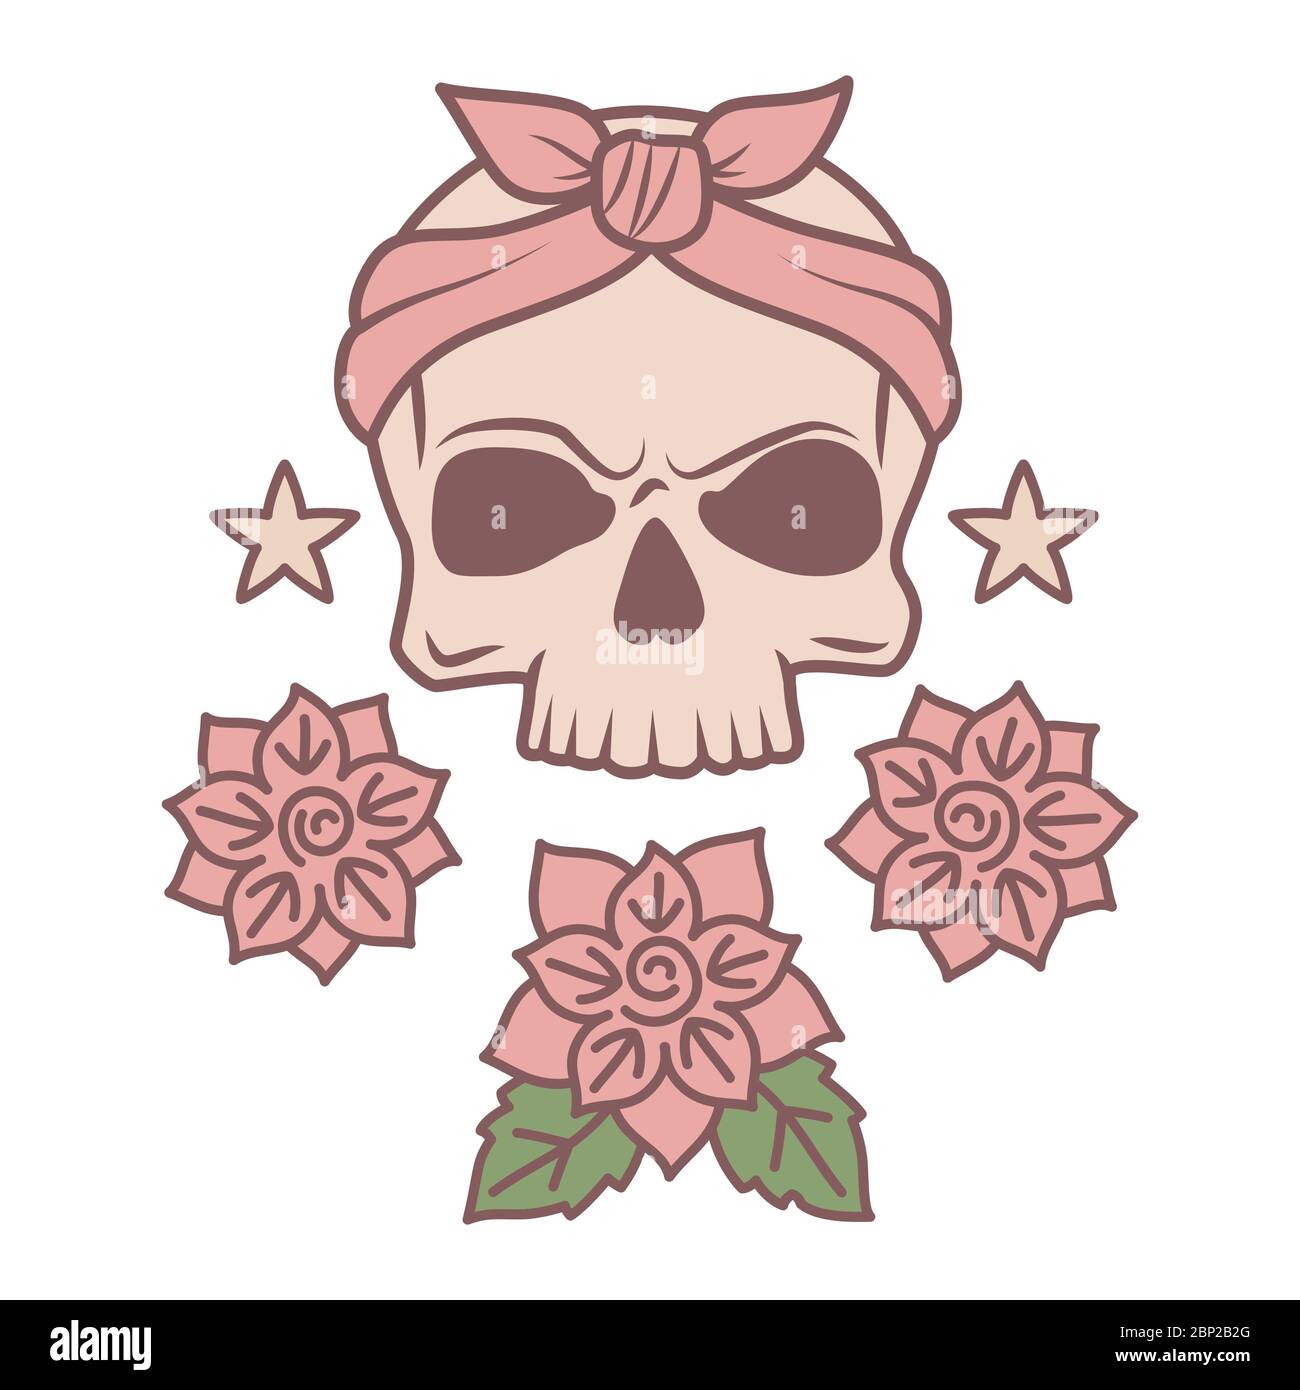 Tattoo Skull Drawings Stock Photos and Images - 123RF